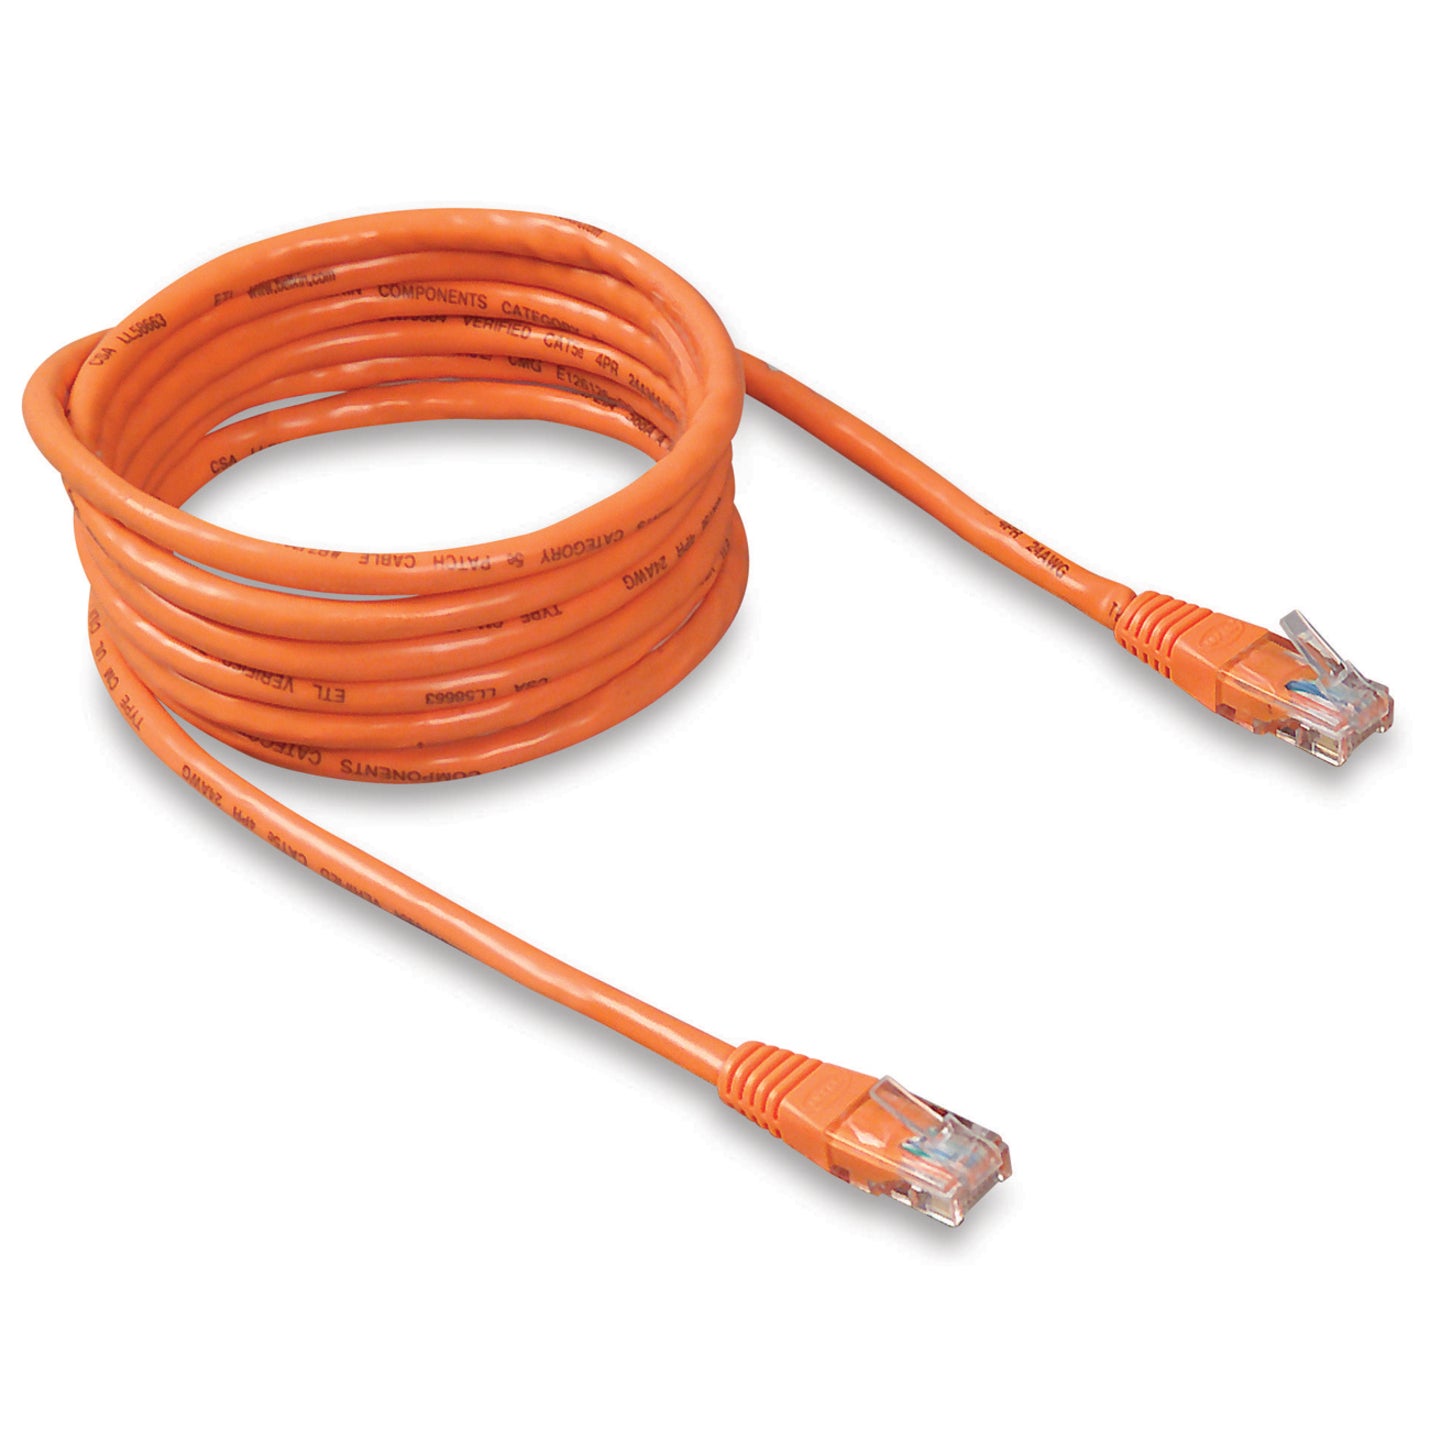 Belkin A3L980-02-ORG-S High Performance Cat. 6 UTP Network Patch Cable, 2 ft, Snagless, Orange